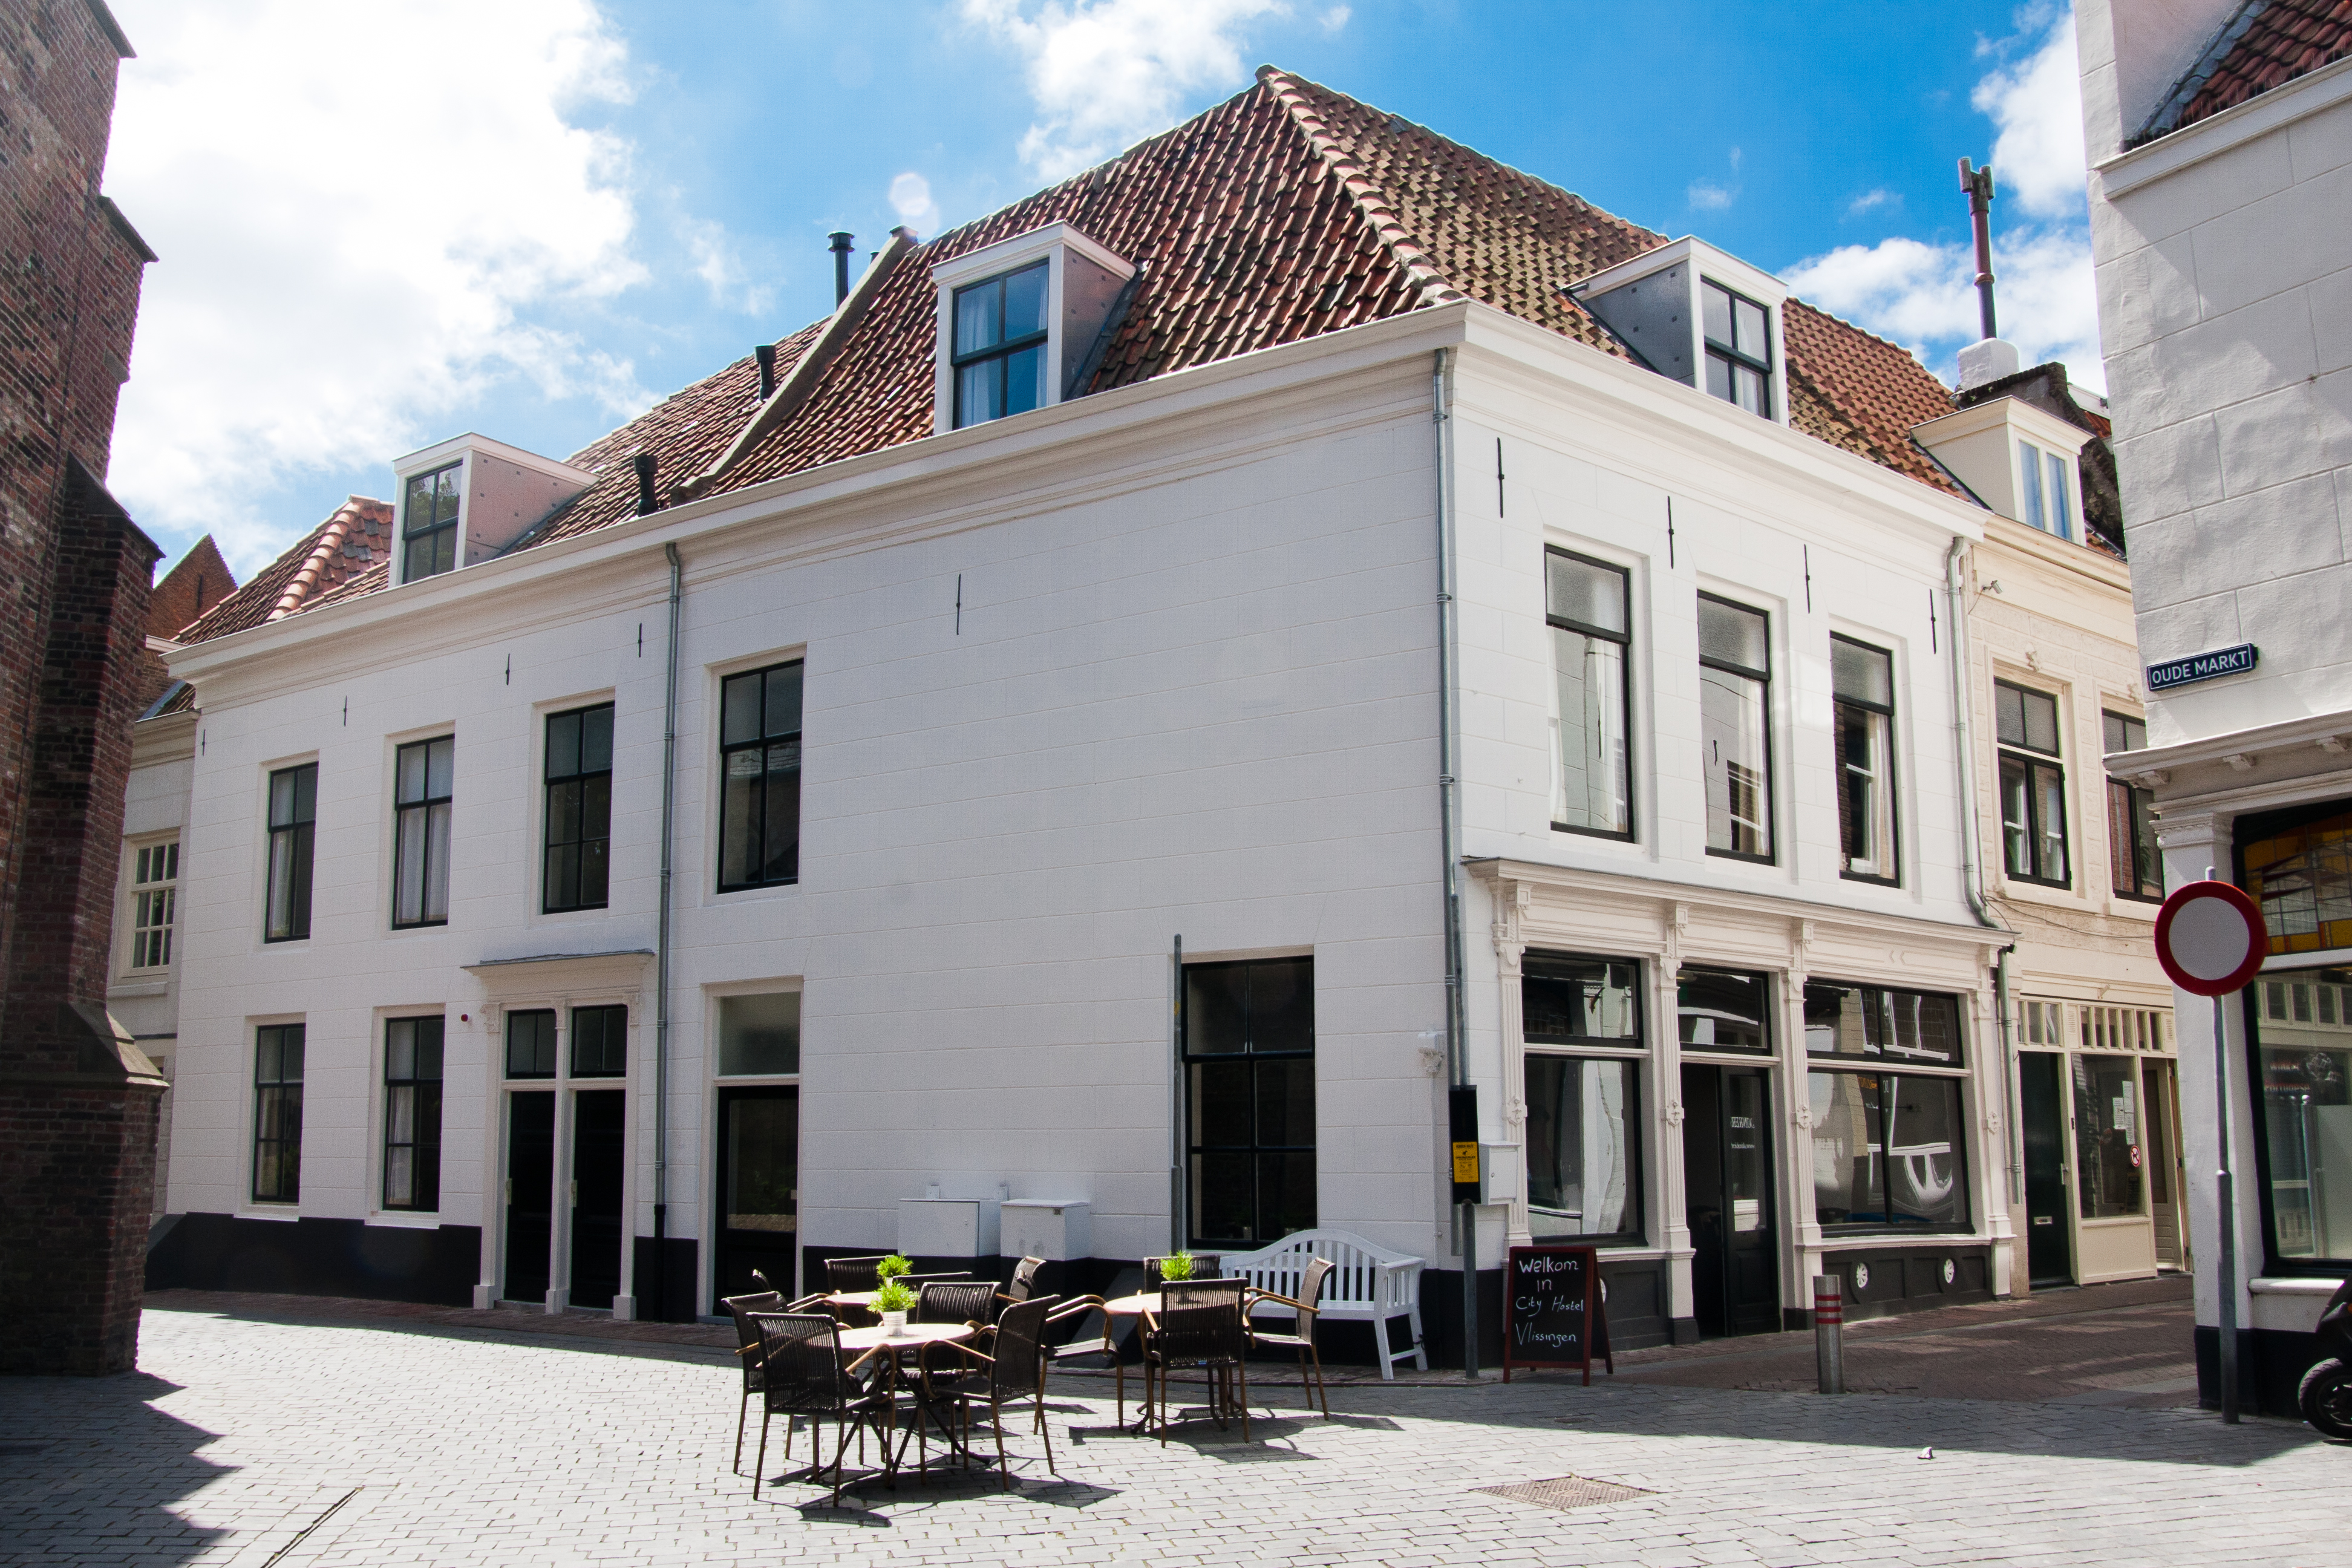 City Hostel Vlissingen <br/>66.75 ew <br/> <a href='http://vakantieoplossing.nl/outpage/?id=341781c057bad936b4a7259a88e055b3' target='_blank'>View Details</a>